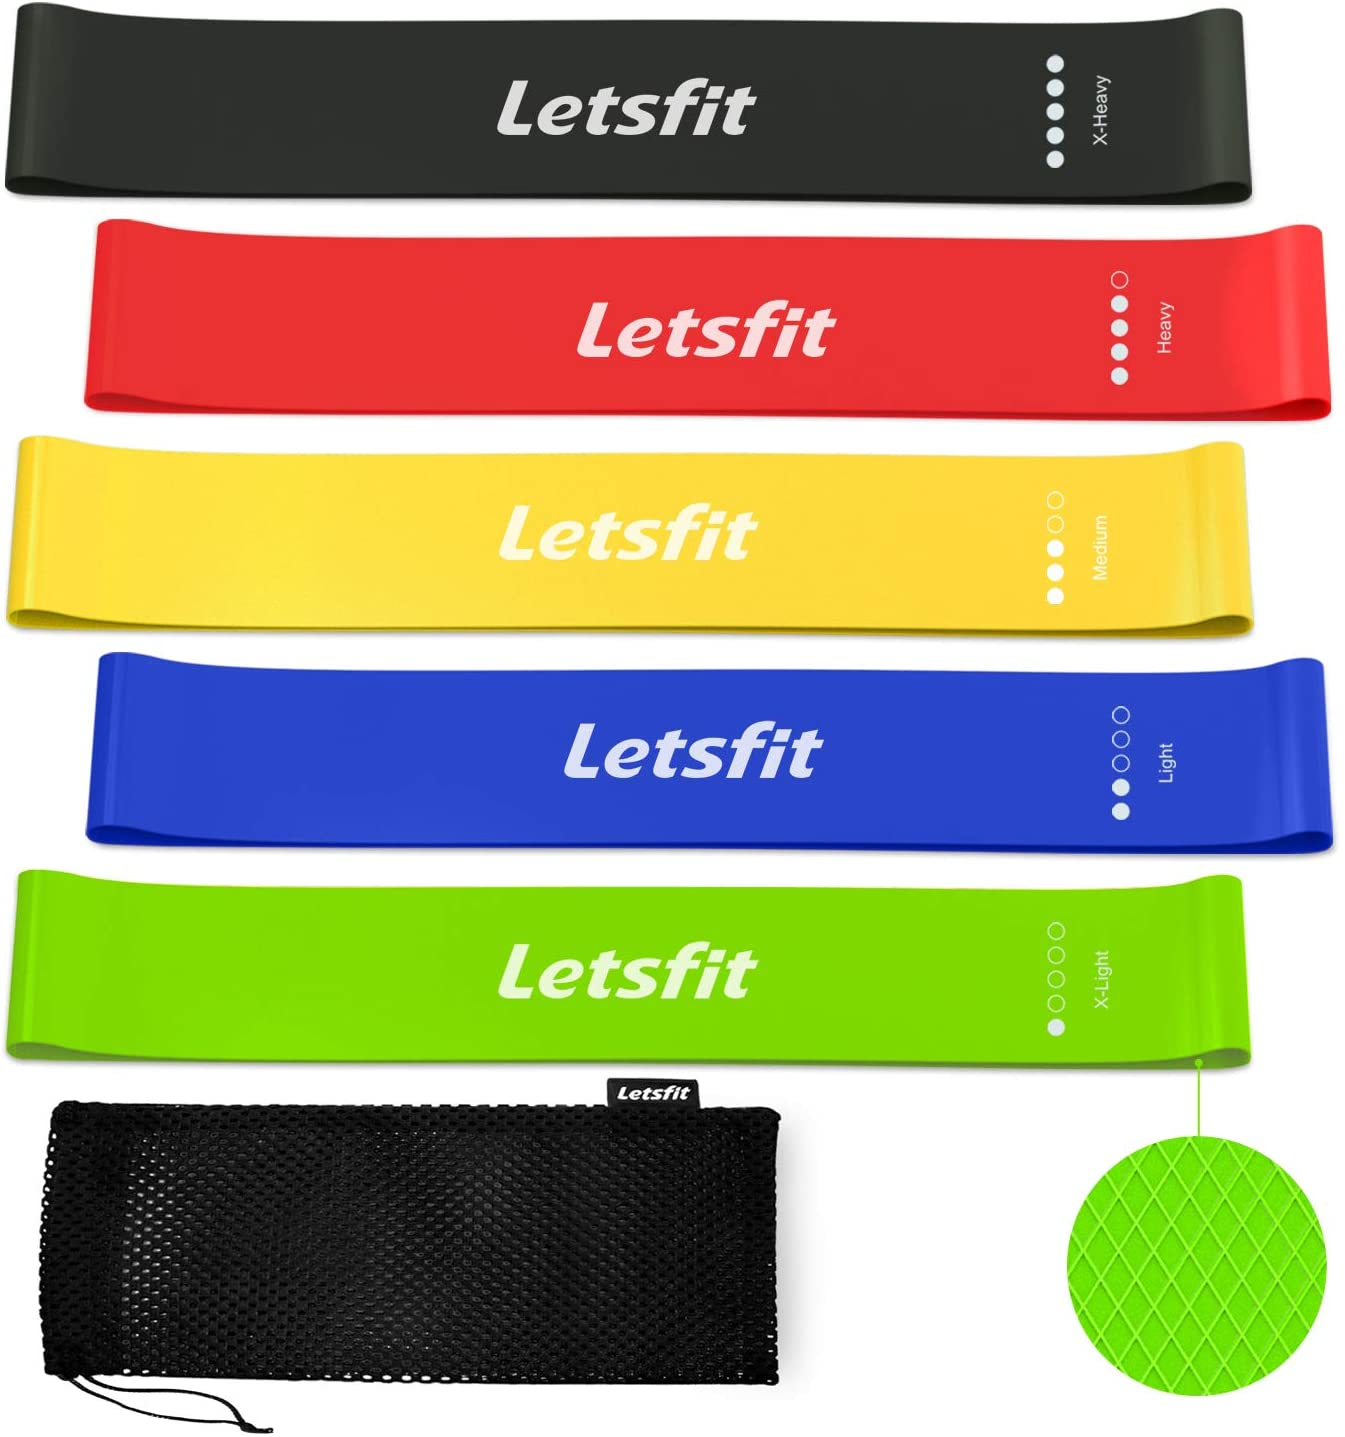 Letsfit Resistance Loop Bands are thicker than the cheaper resistance loop bands with 5 bands that can offer from 5lbs to 40lbs of resistance